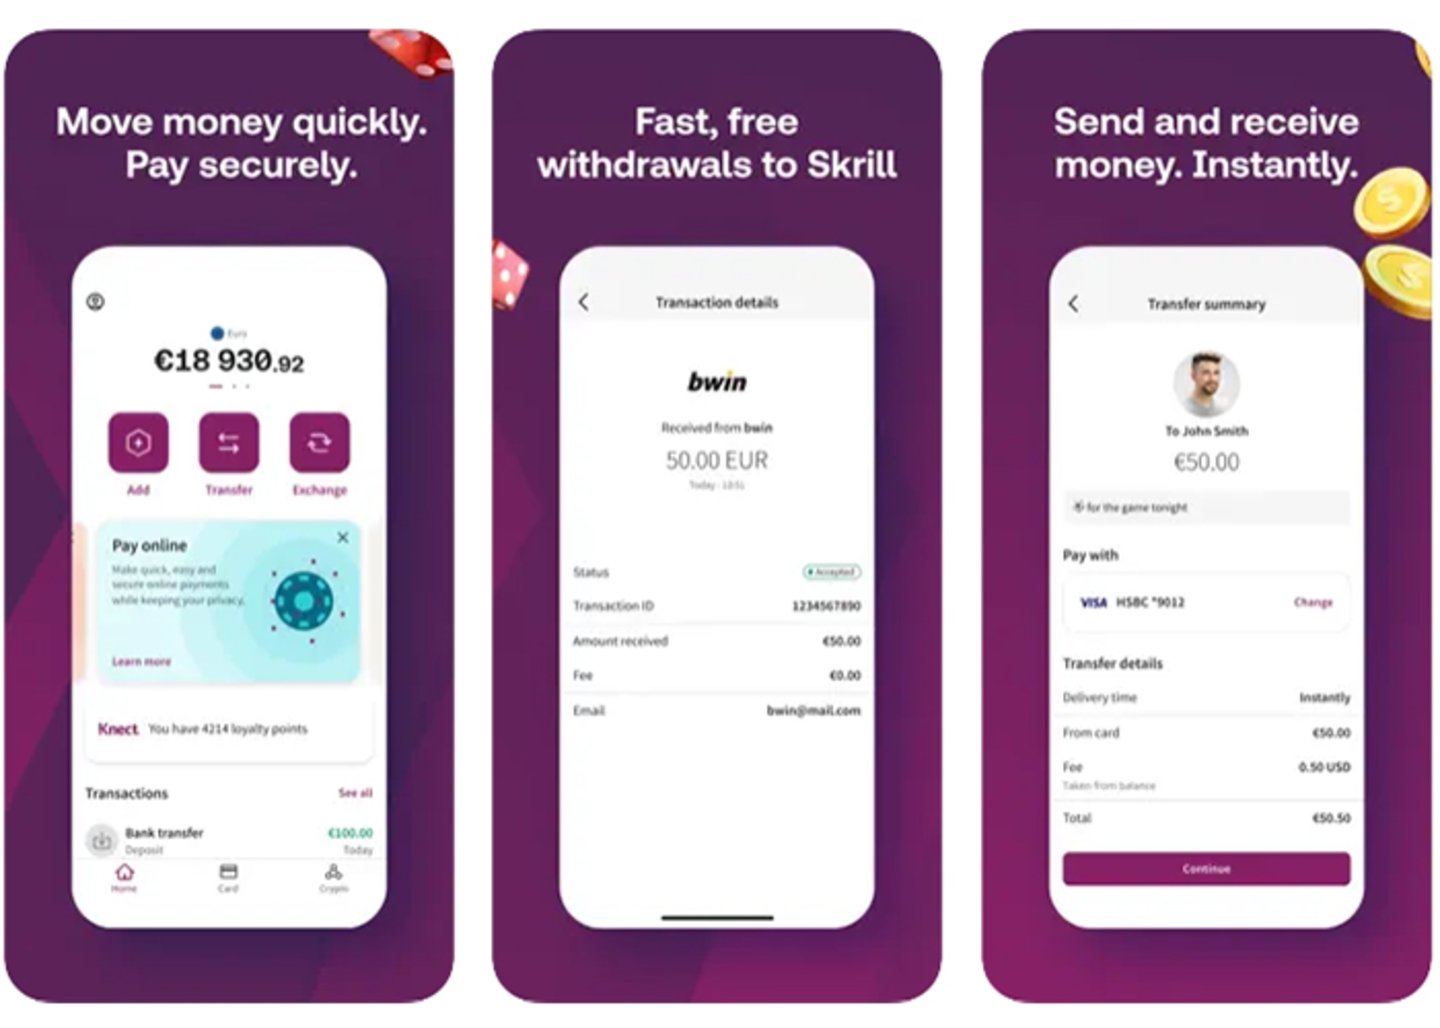 Pay and send money worry-free with Skrill - fast and secure